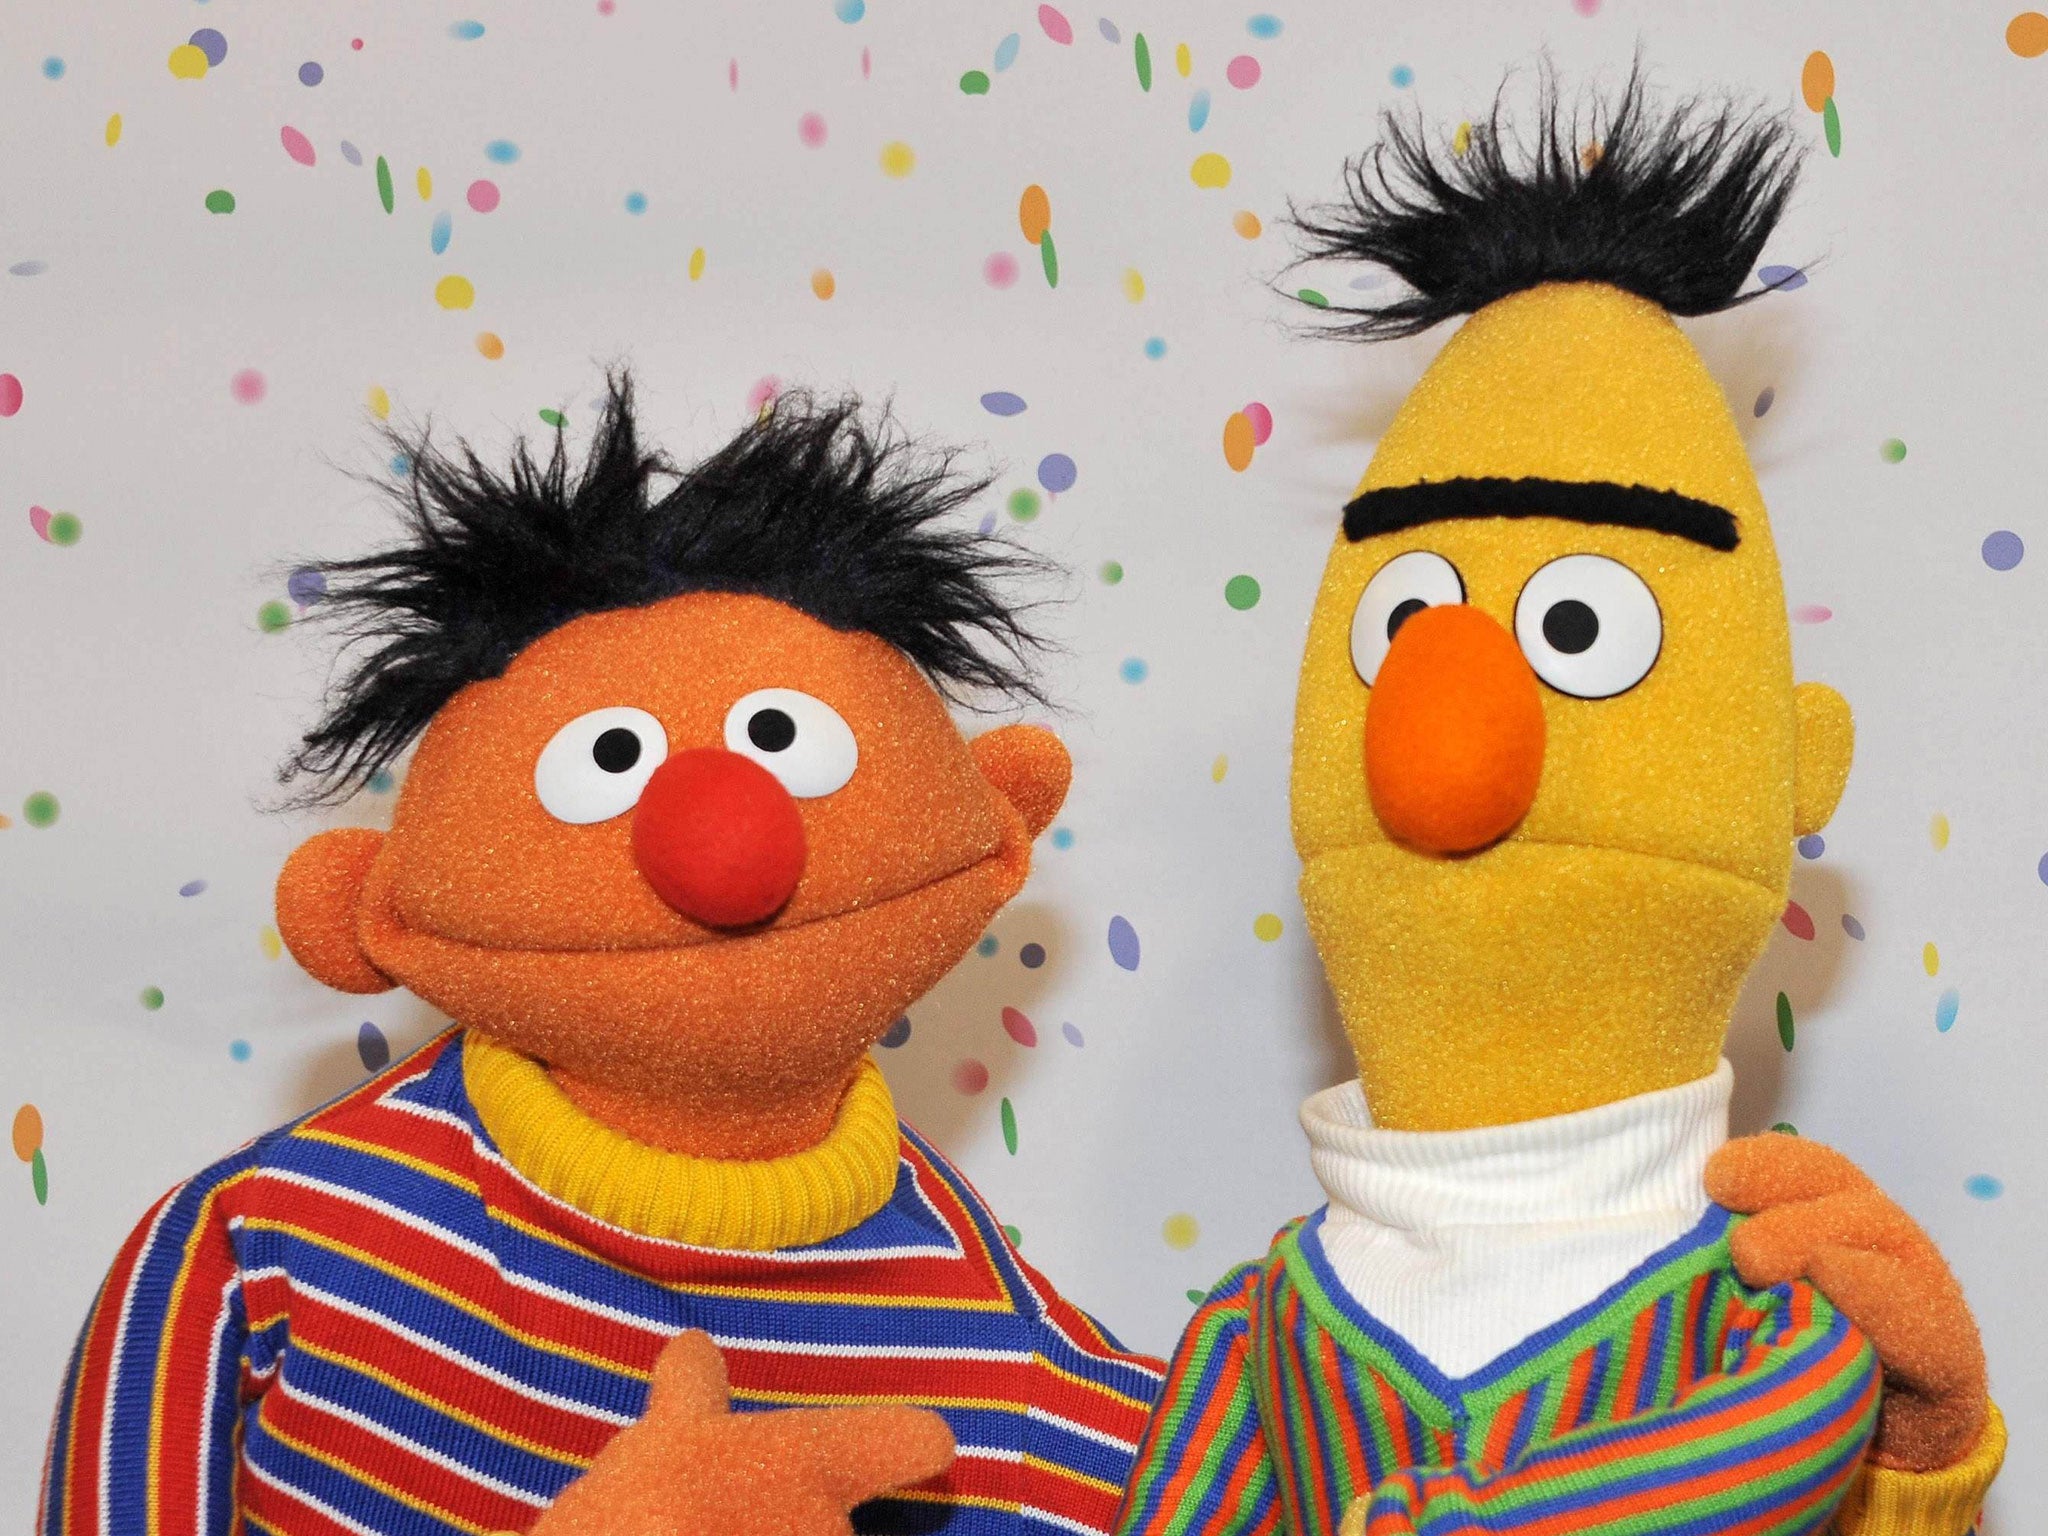 The bakery refused to produce a cake featuring a picture of the Sesame Street characters Bert and Ernie alongside the slogan: "Support Gay Marriage"